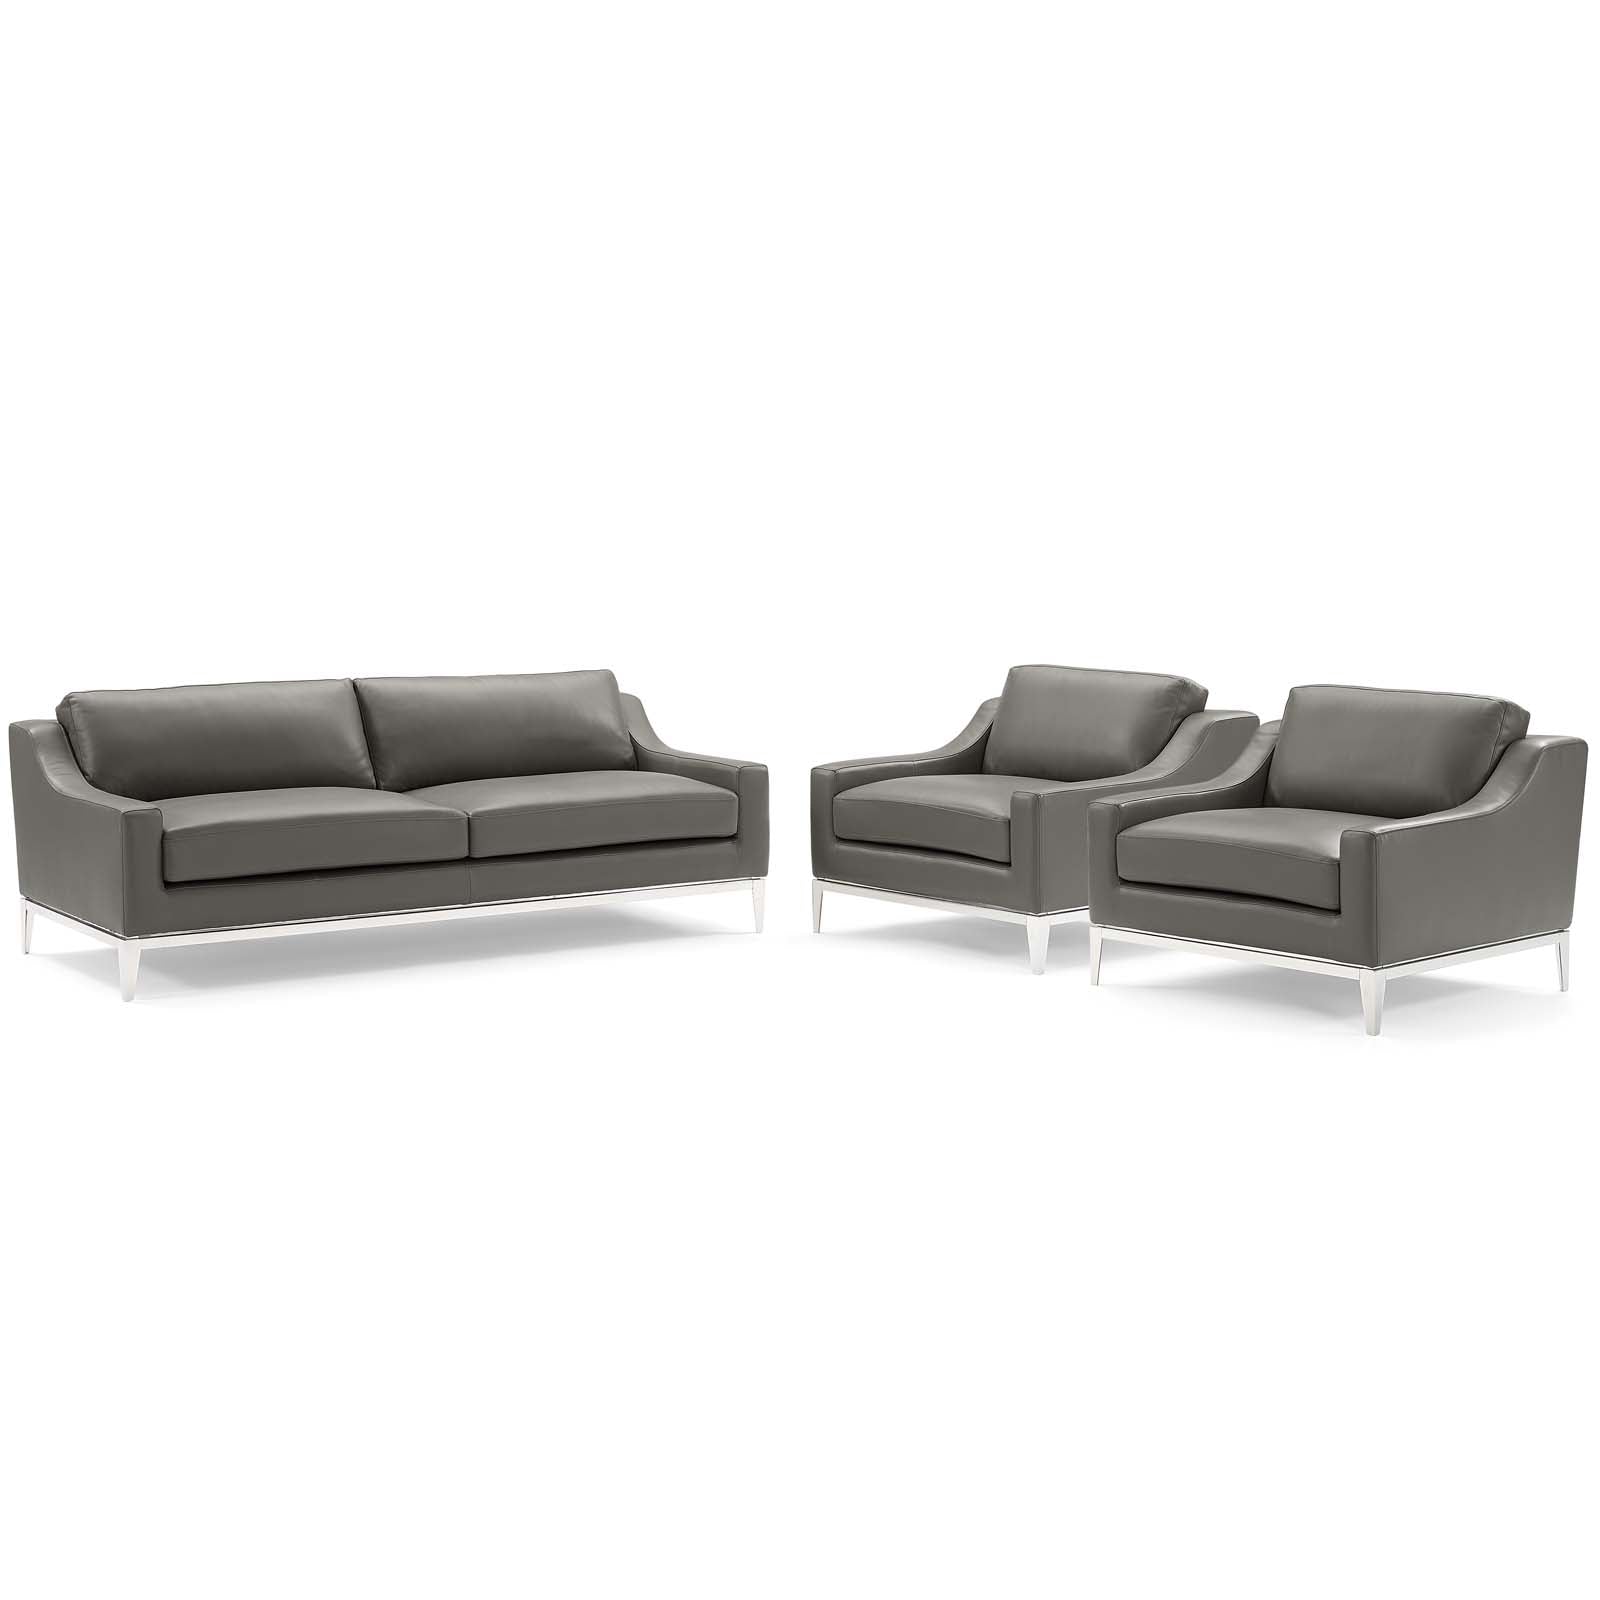 Harness 3 Piece Stainless Steel Base Leather Set - East Shore Modern Home Furnishings